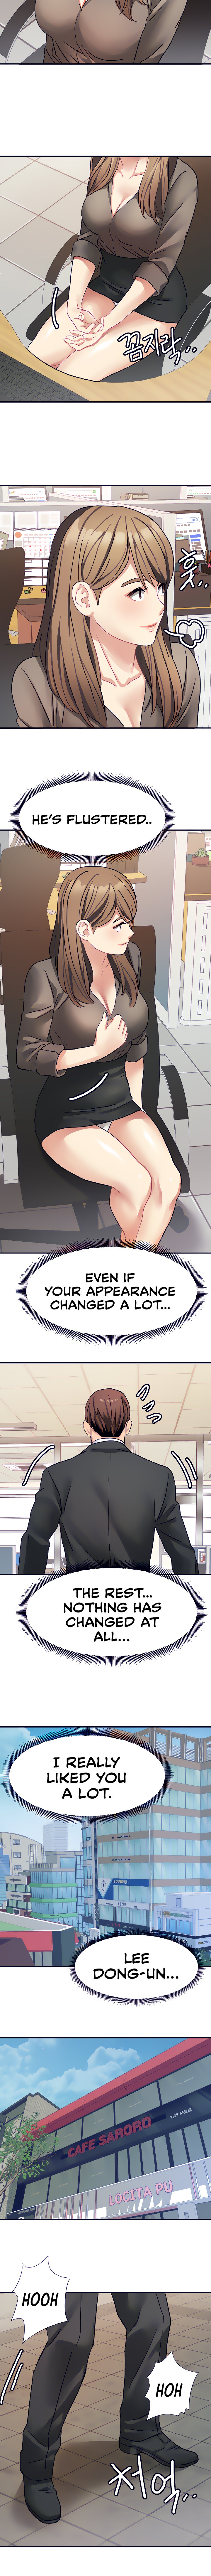 Punishments for Bad Girls - Chapter 21 Page 6